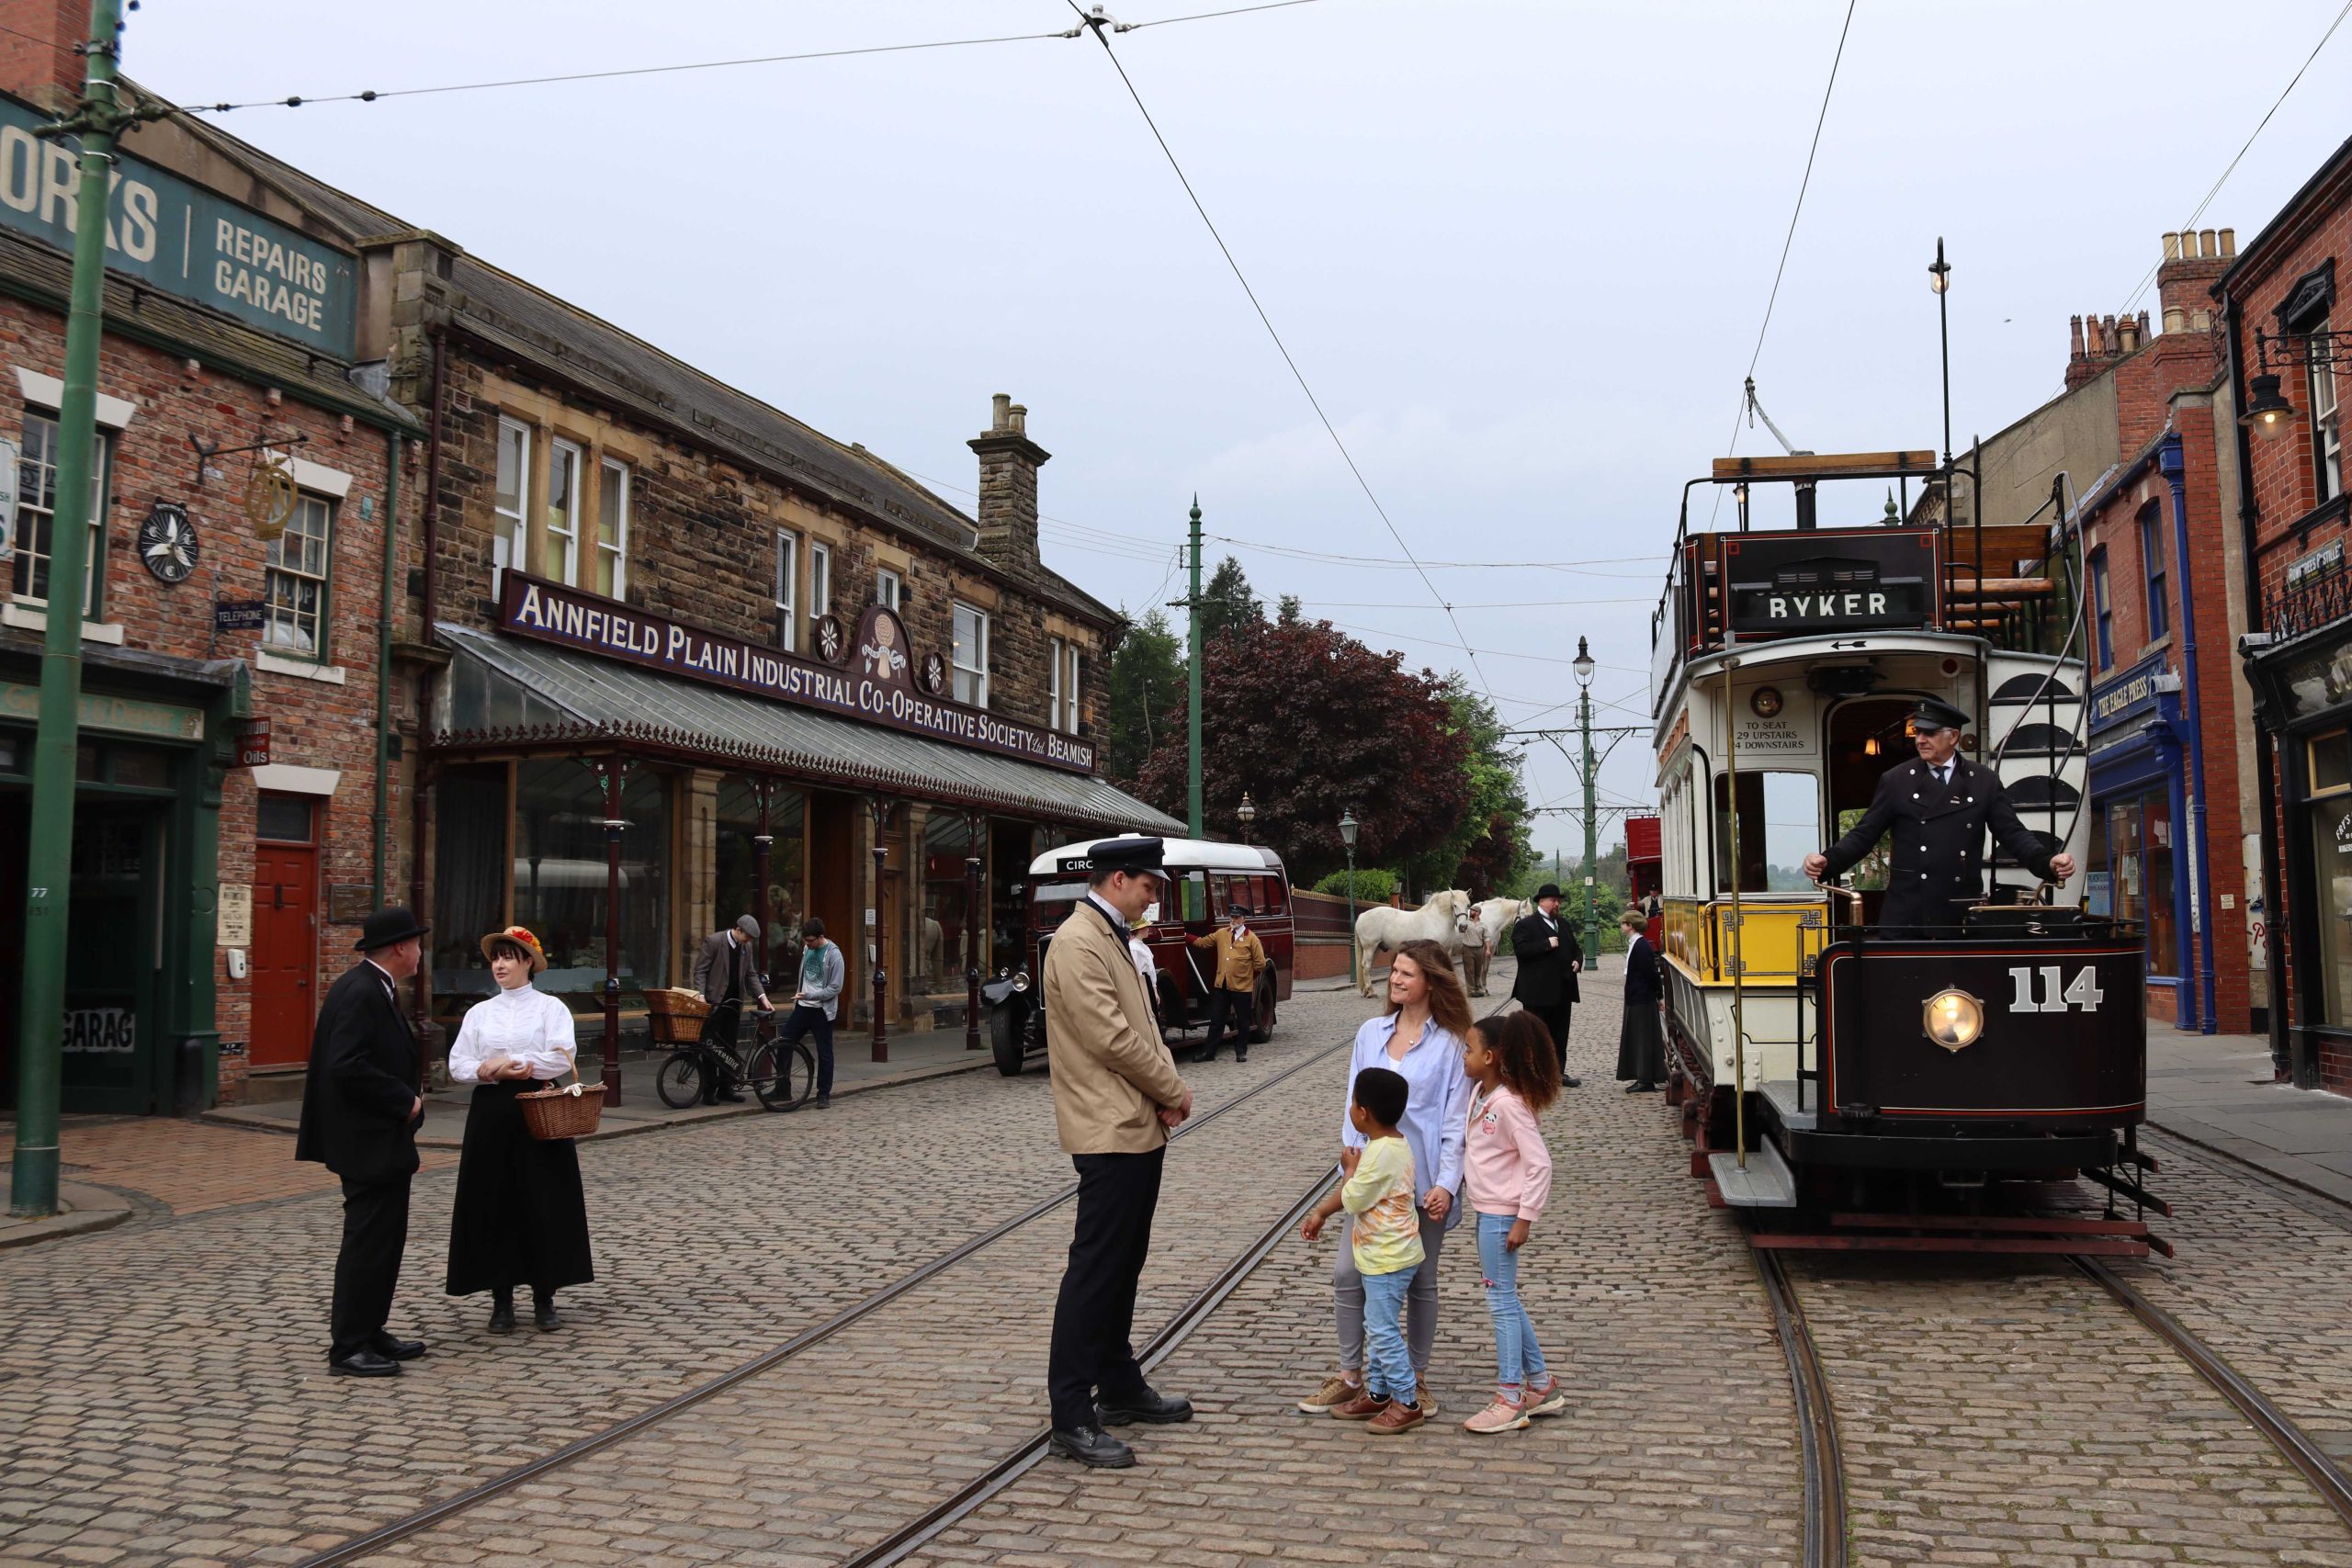 1900s-style town scene with tram and shops.